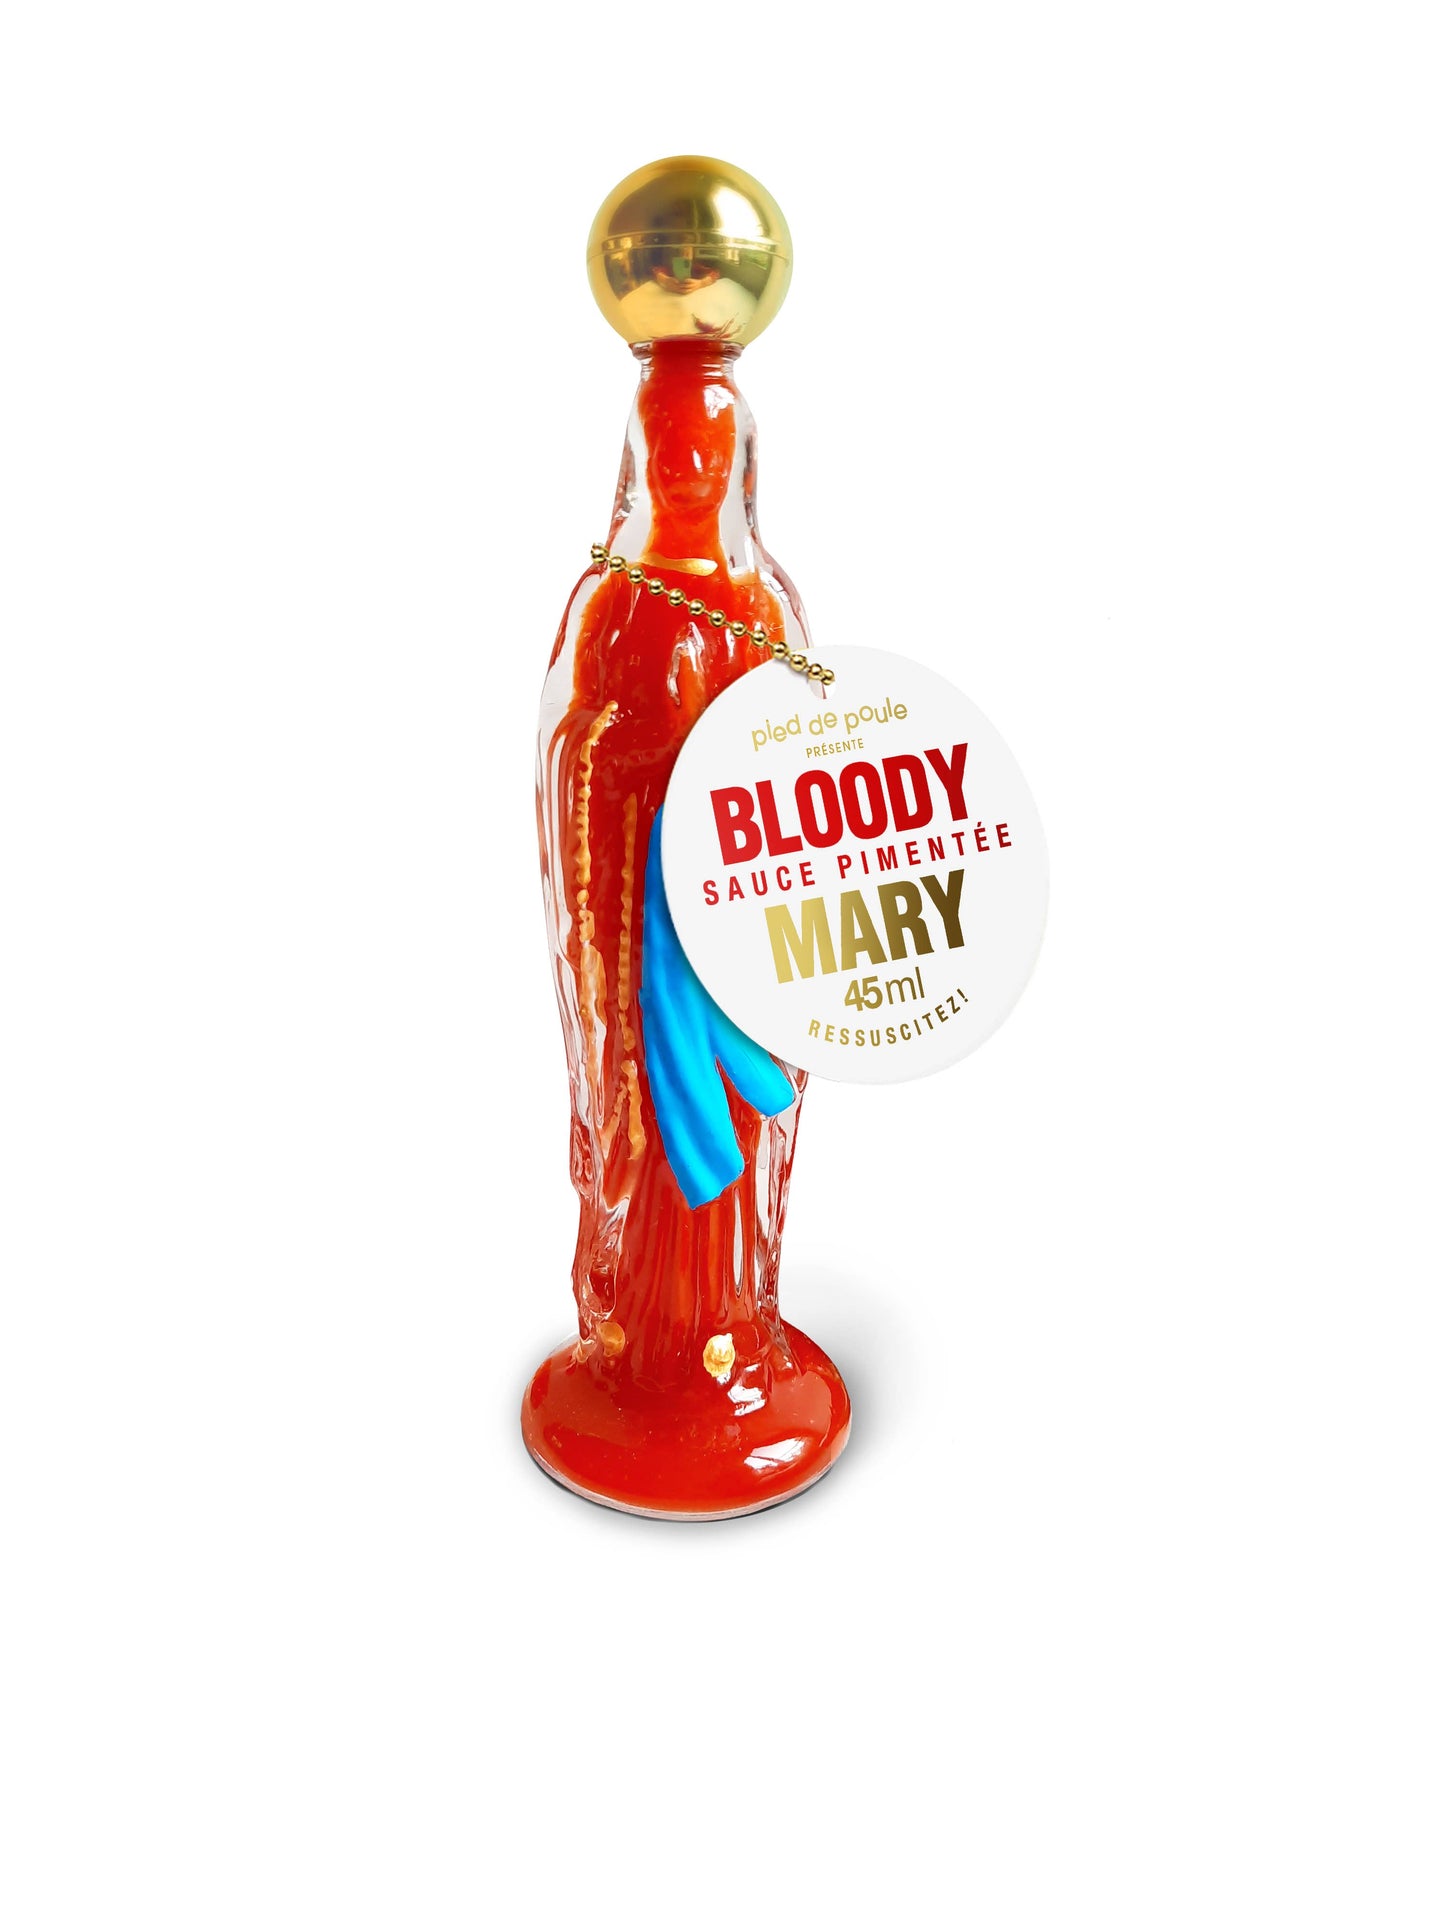 "Bloody Mary" Hot sauce